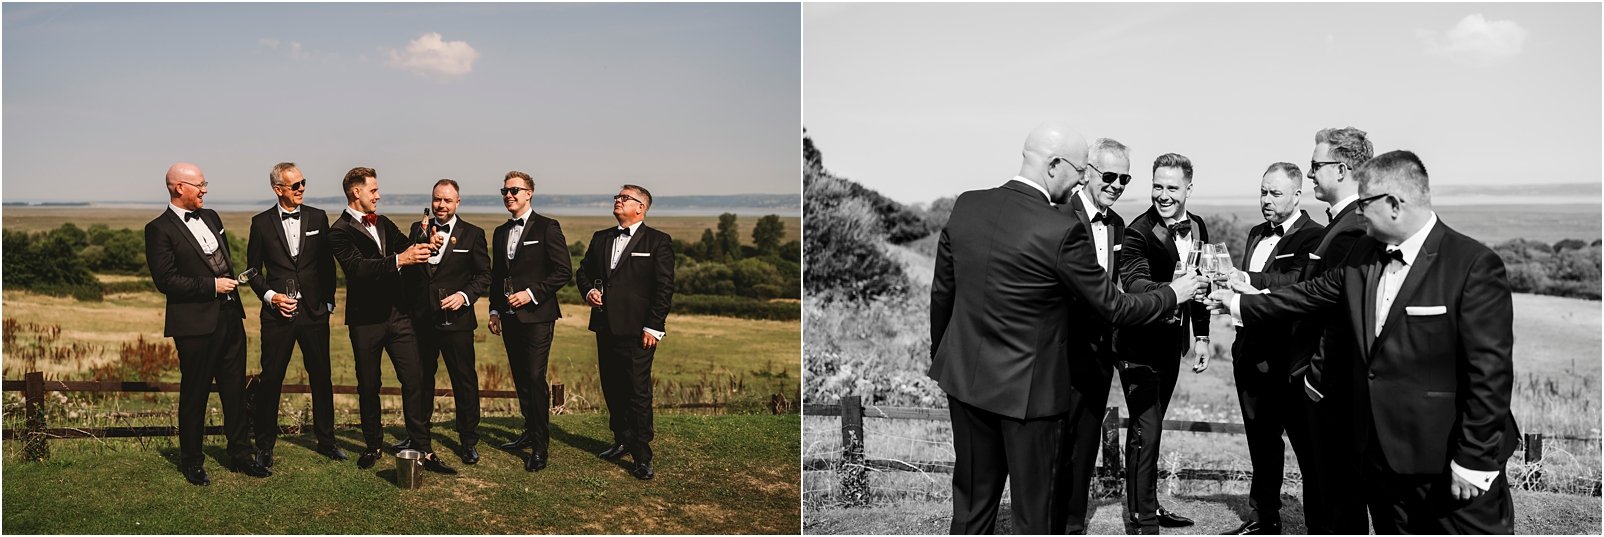 fairyhill-gower-wedding-photographer-oldwalls-collection-marc-smith-photography_0152.jpg